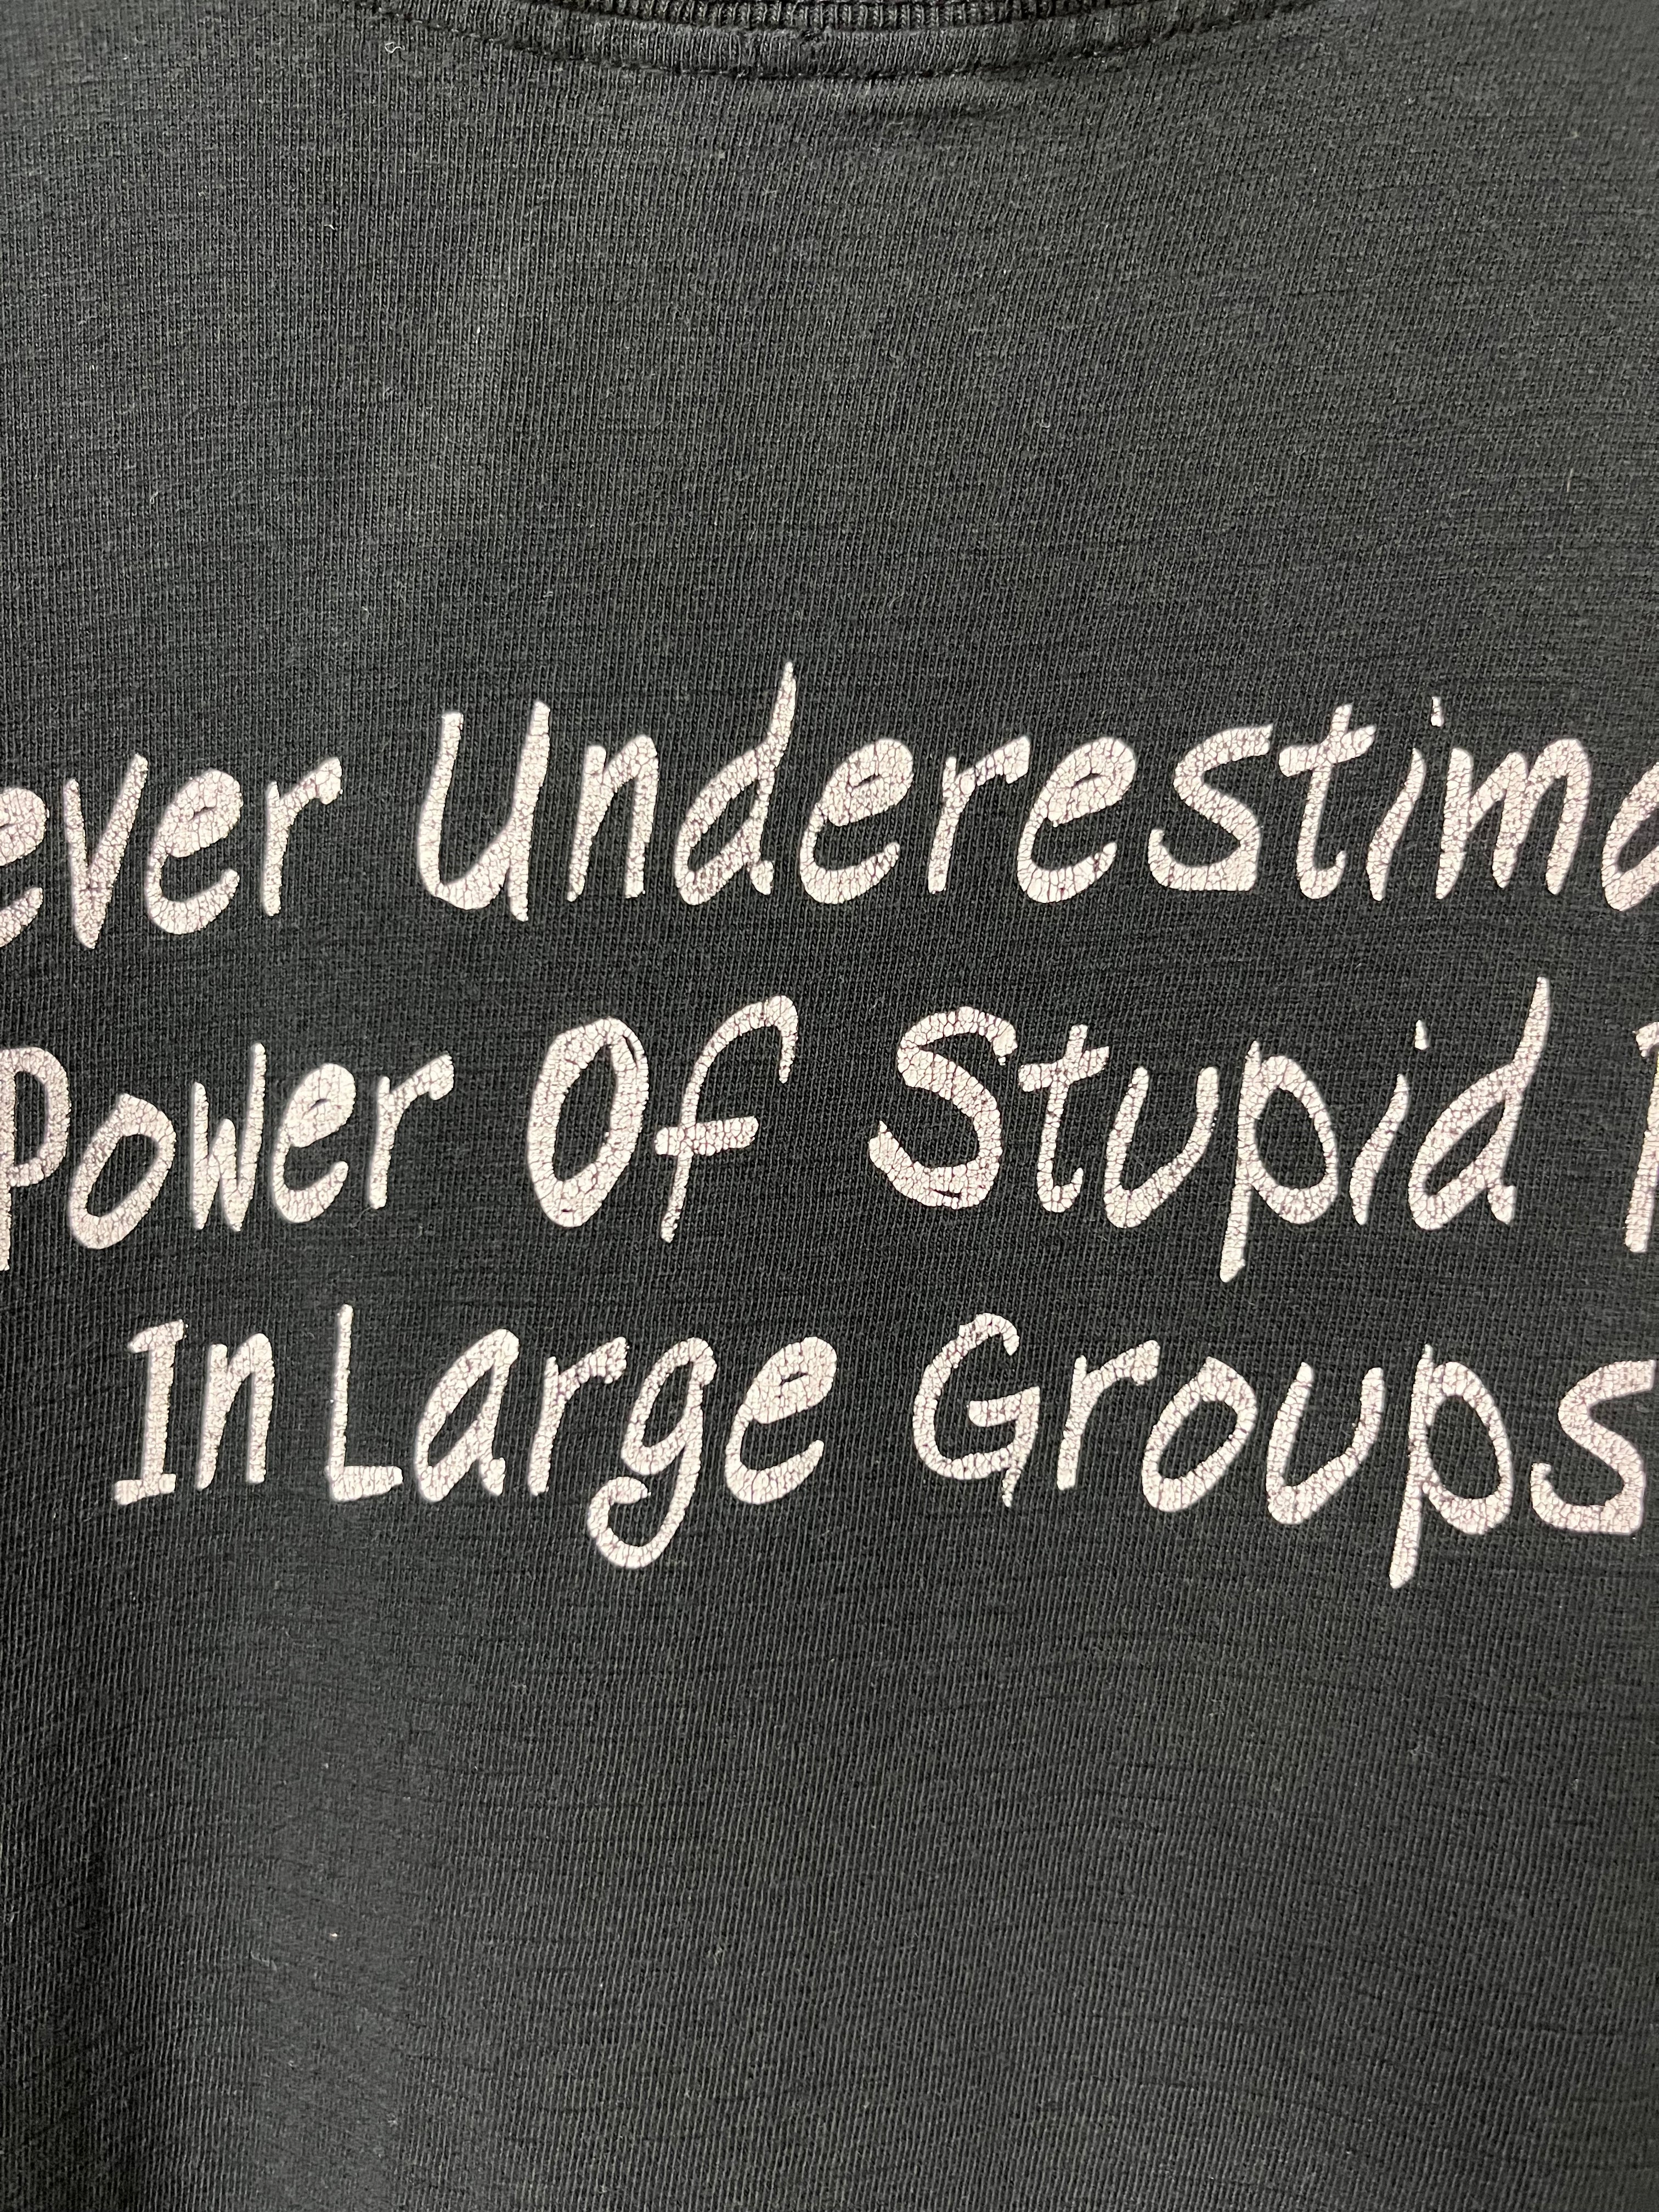 Late 90s/Early ‘00s ‘Never Underestimate the Power of Stupid People’ Distressed T-Shirt - Faded Black - L/XL